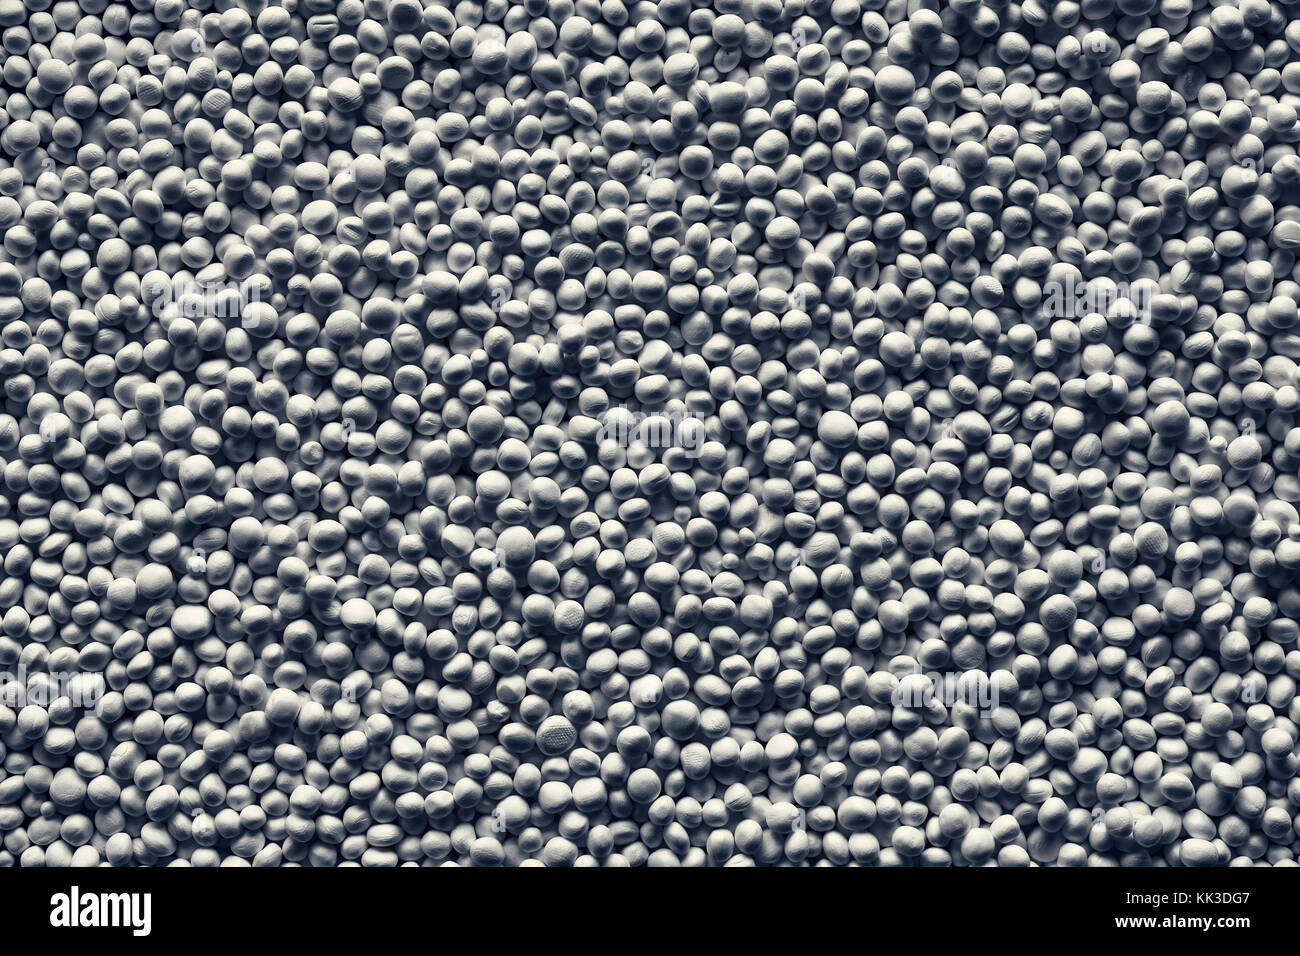 Abstract texture or background made of styrofoam balls, color toning applied. Stock Photo